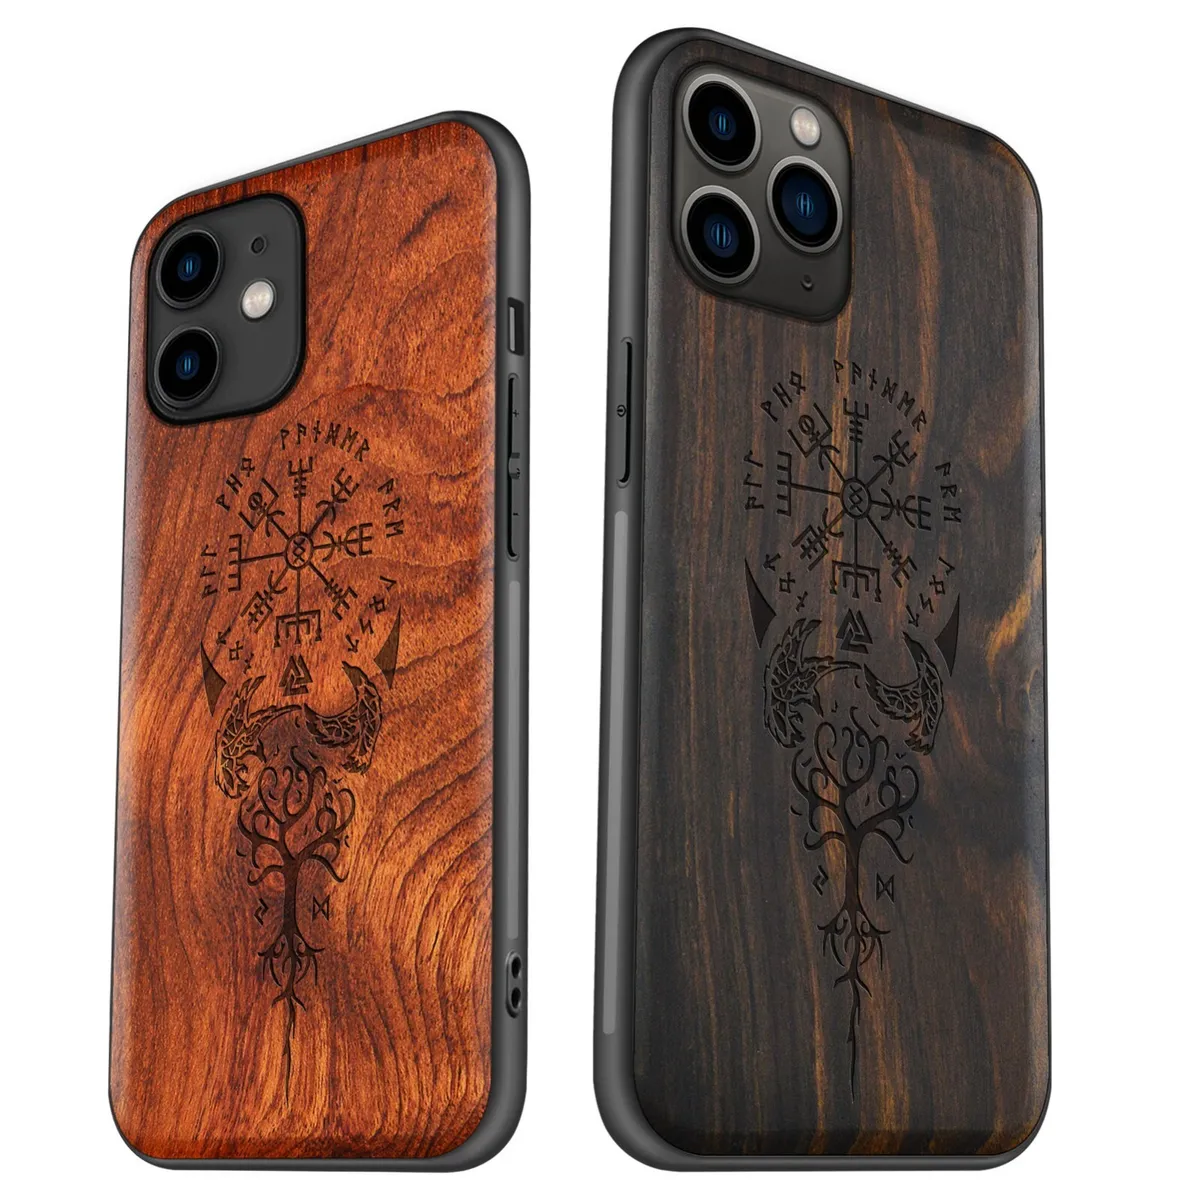 Wooden Phone Cases for Pet Owners: Protecting Against Scratches插图